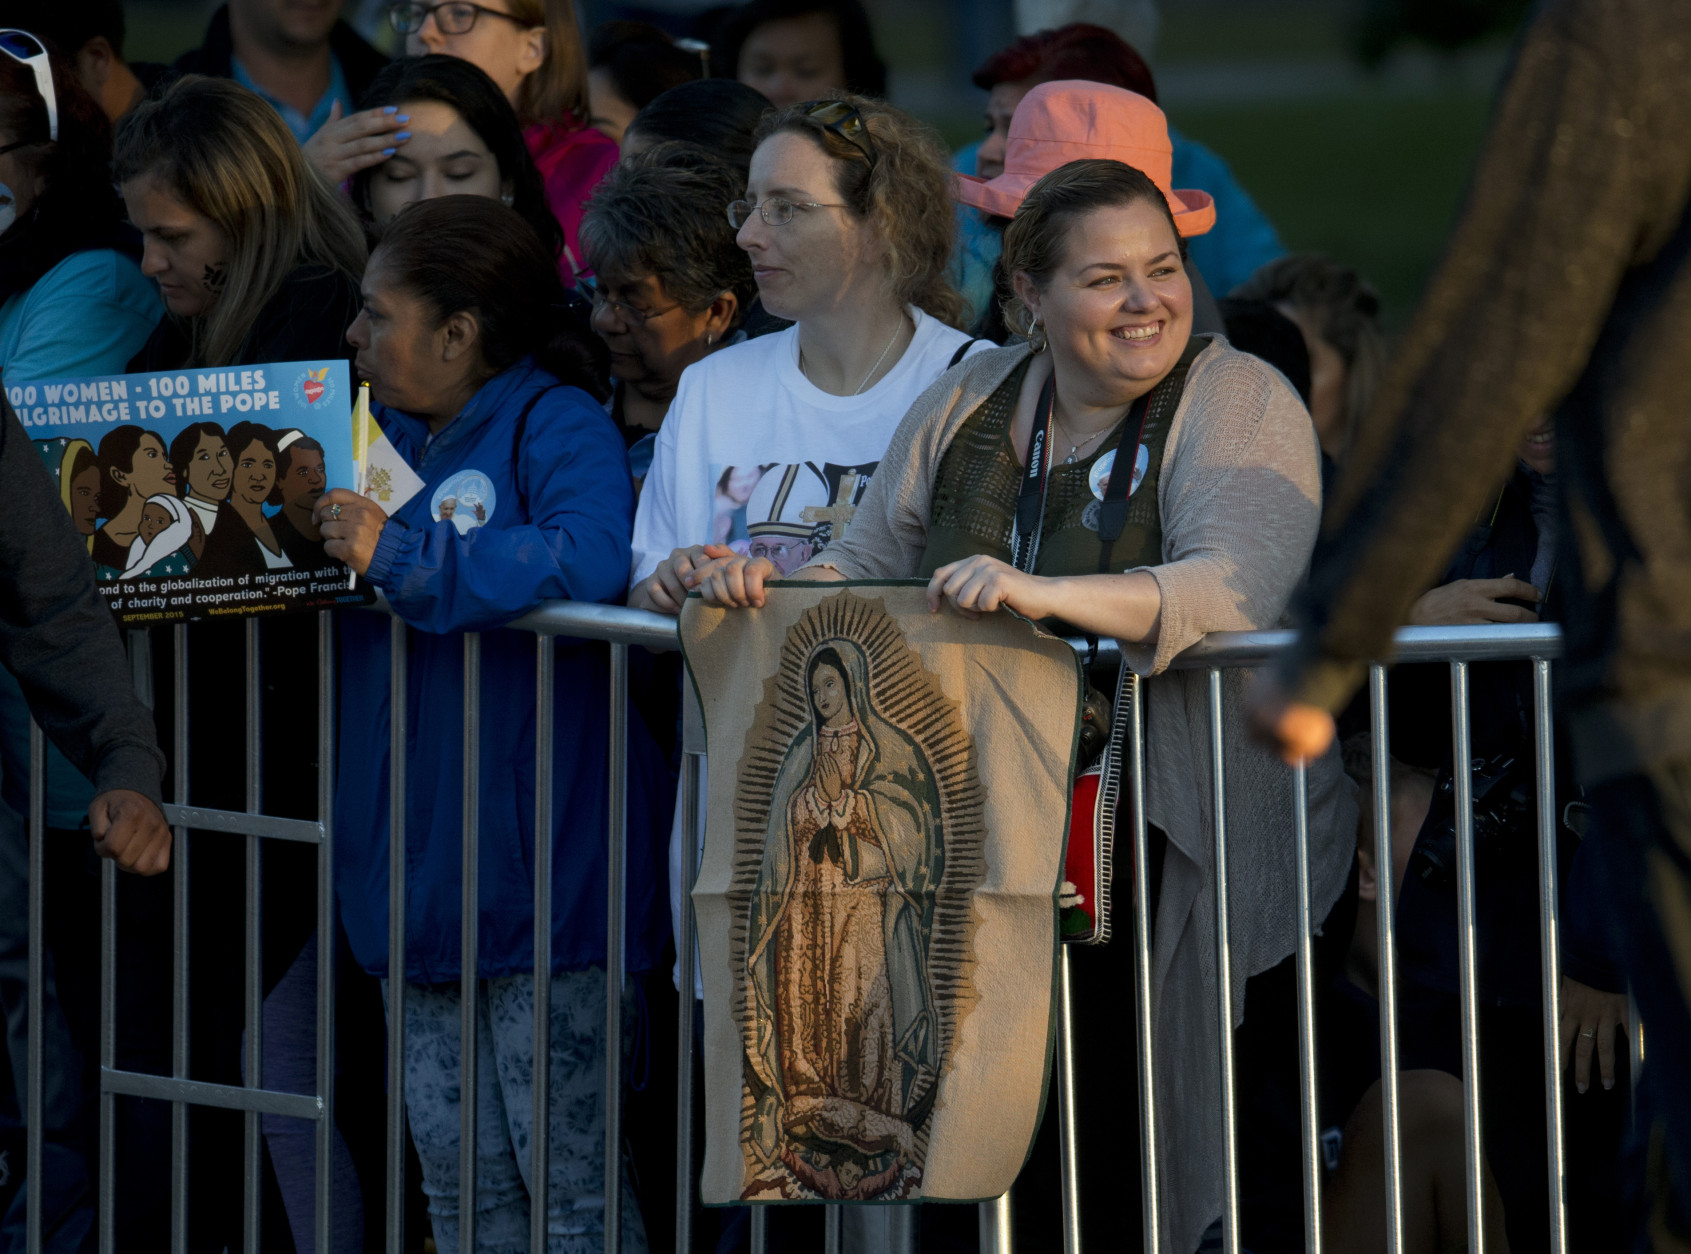 A woman holds an image of the Virgin Mary as she and others gather on the Pope Francis parade route along the Ellipse near the White House in Washington, Wednesday, Sept. 23, 2015. (AP Photo/Carolyn Kaster)